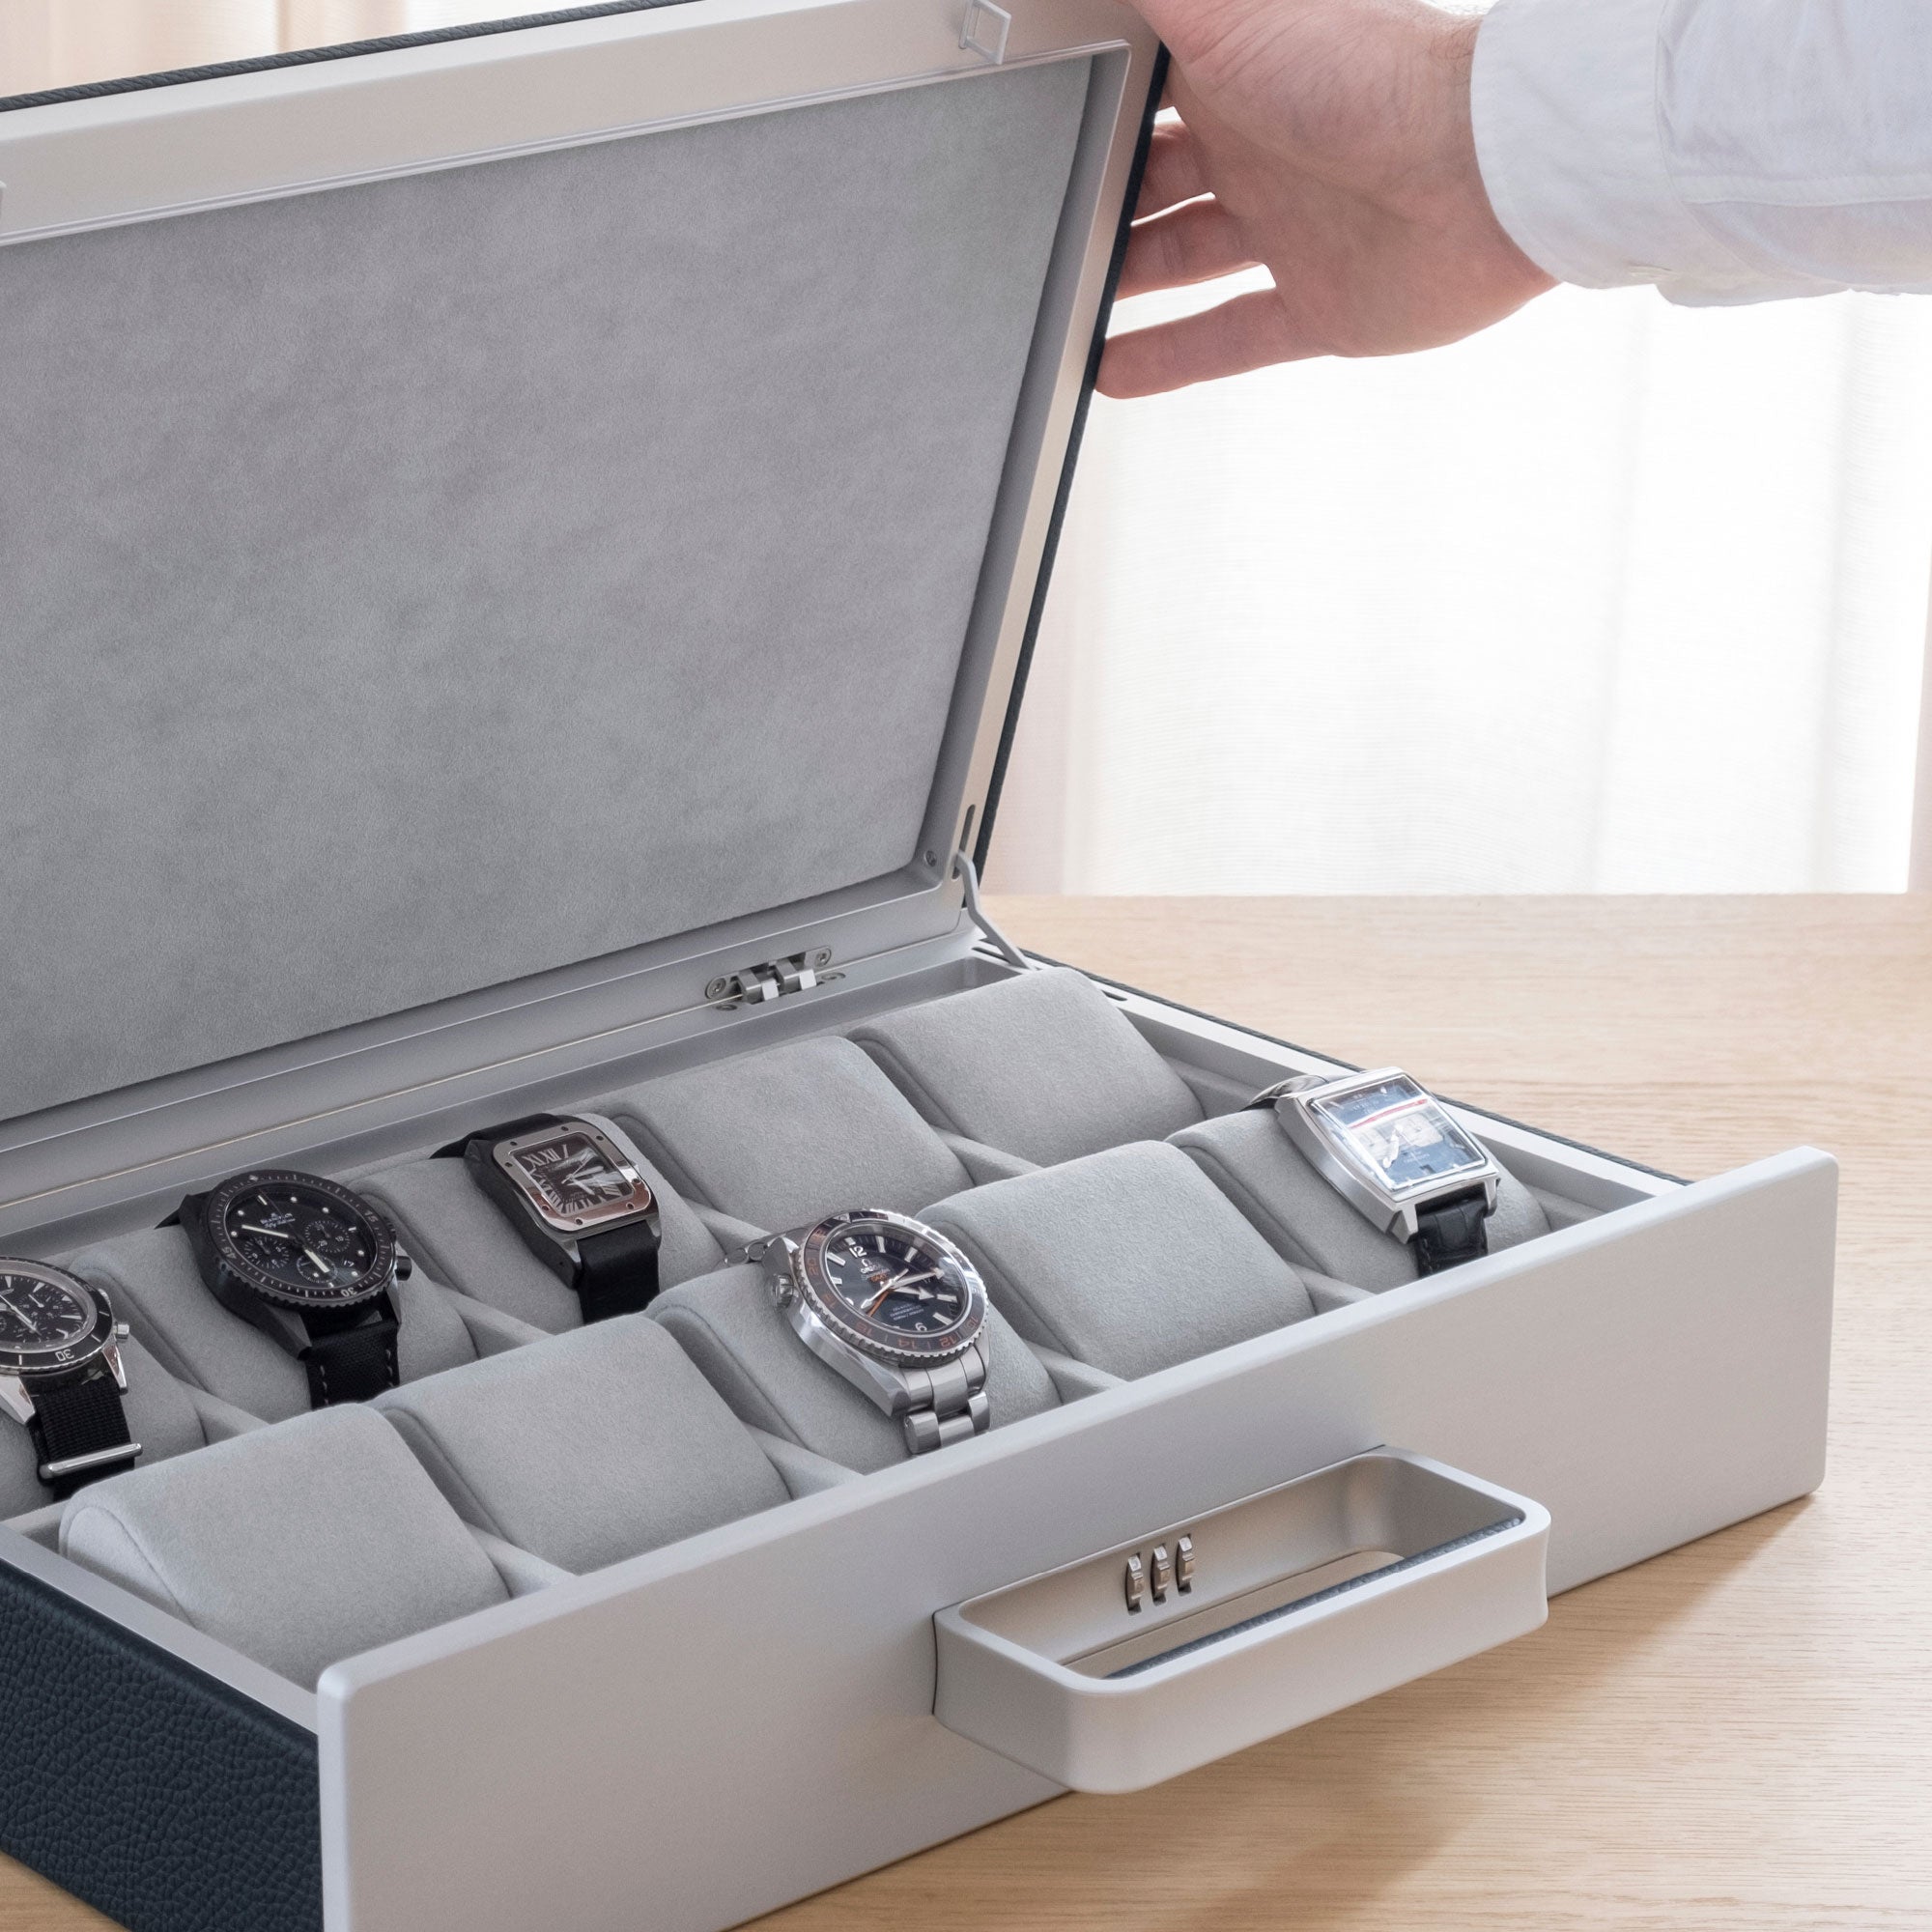 Lifestyle photo of man opening the Mackenzie 10 watch briefcase in marine leather and fog grey interior displaying his watch collection of men's luxury watches